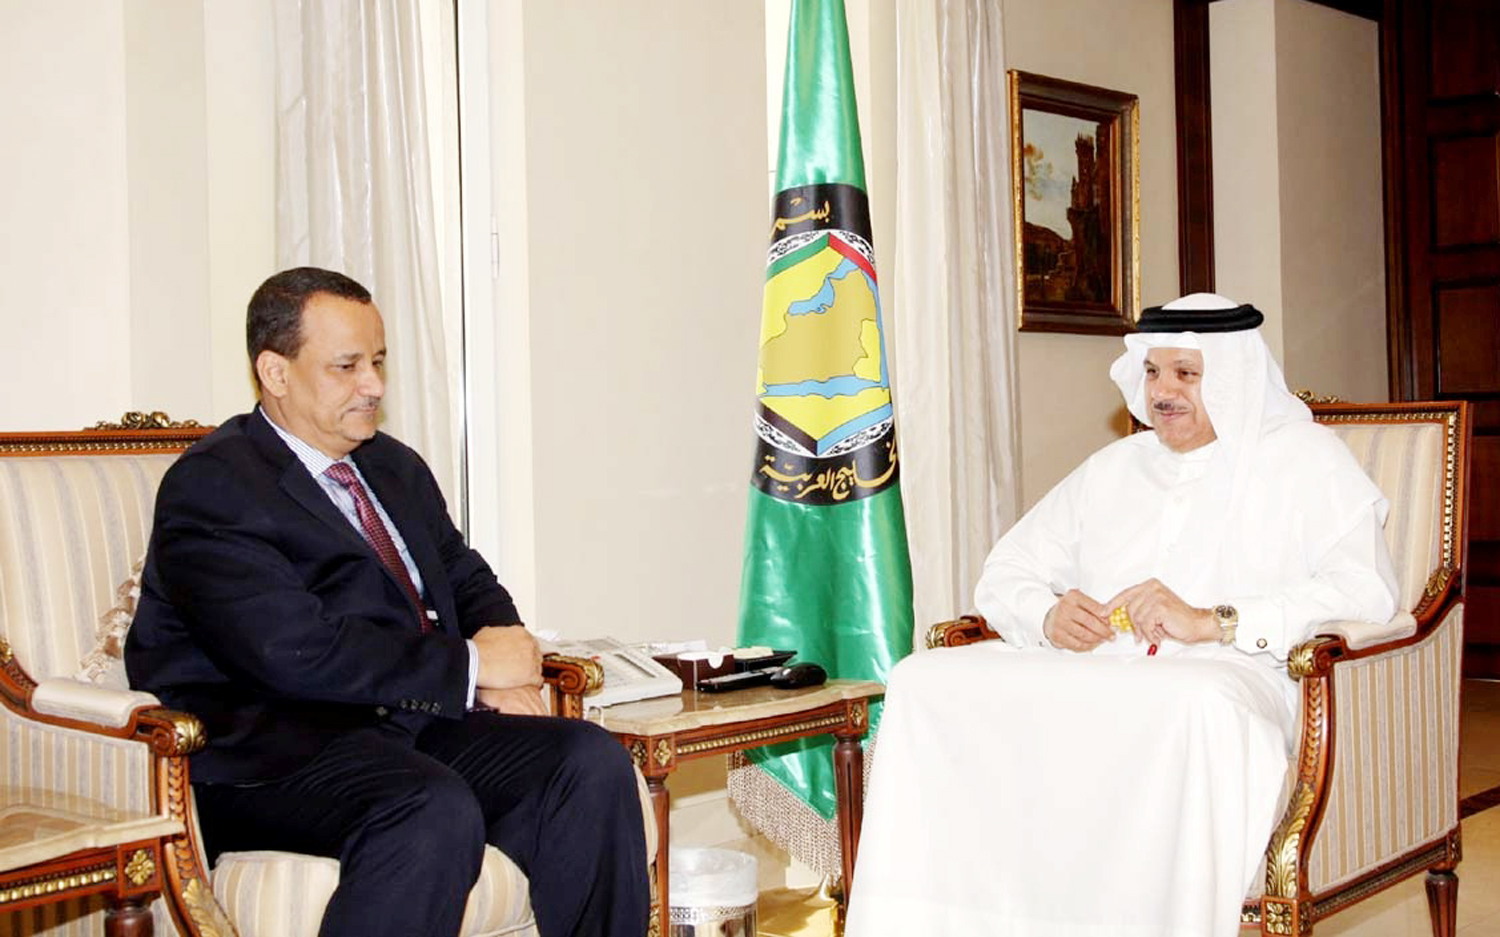 Secretary-General of the Gulf Cooperation Council (GCC) Abdullatif Al-Zayani meets the UN special envoy to Yemen Ismail Ould Cheikh Ahmed